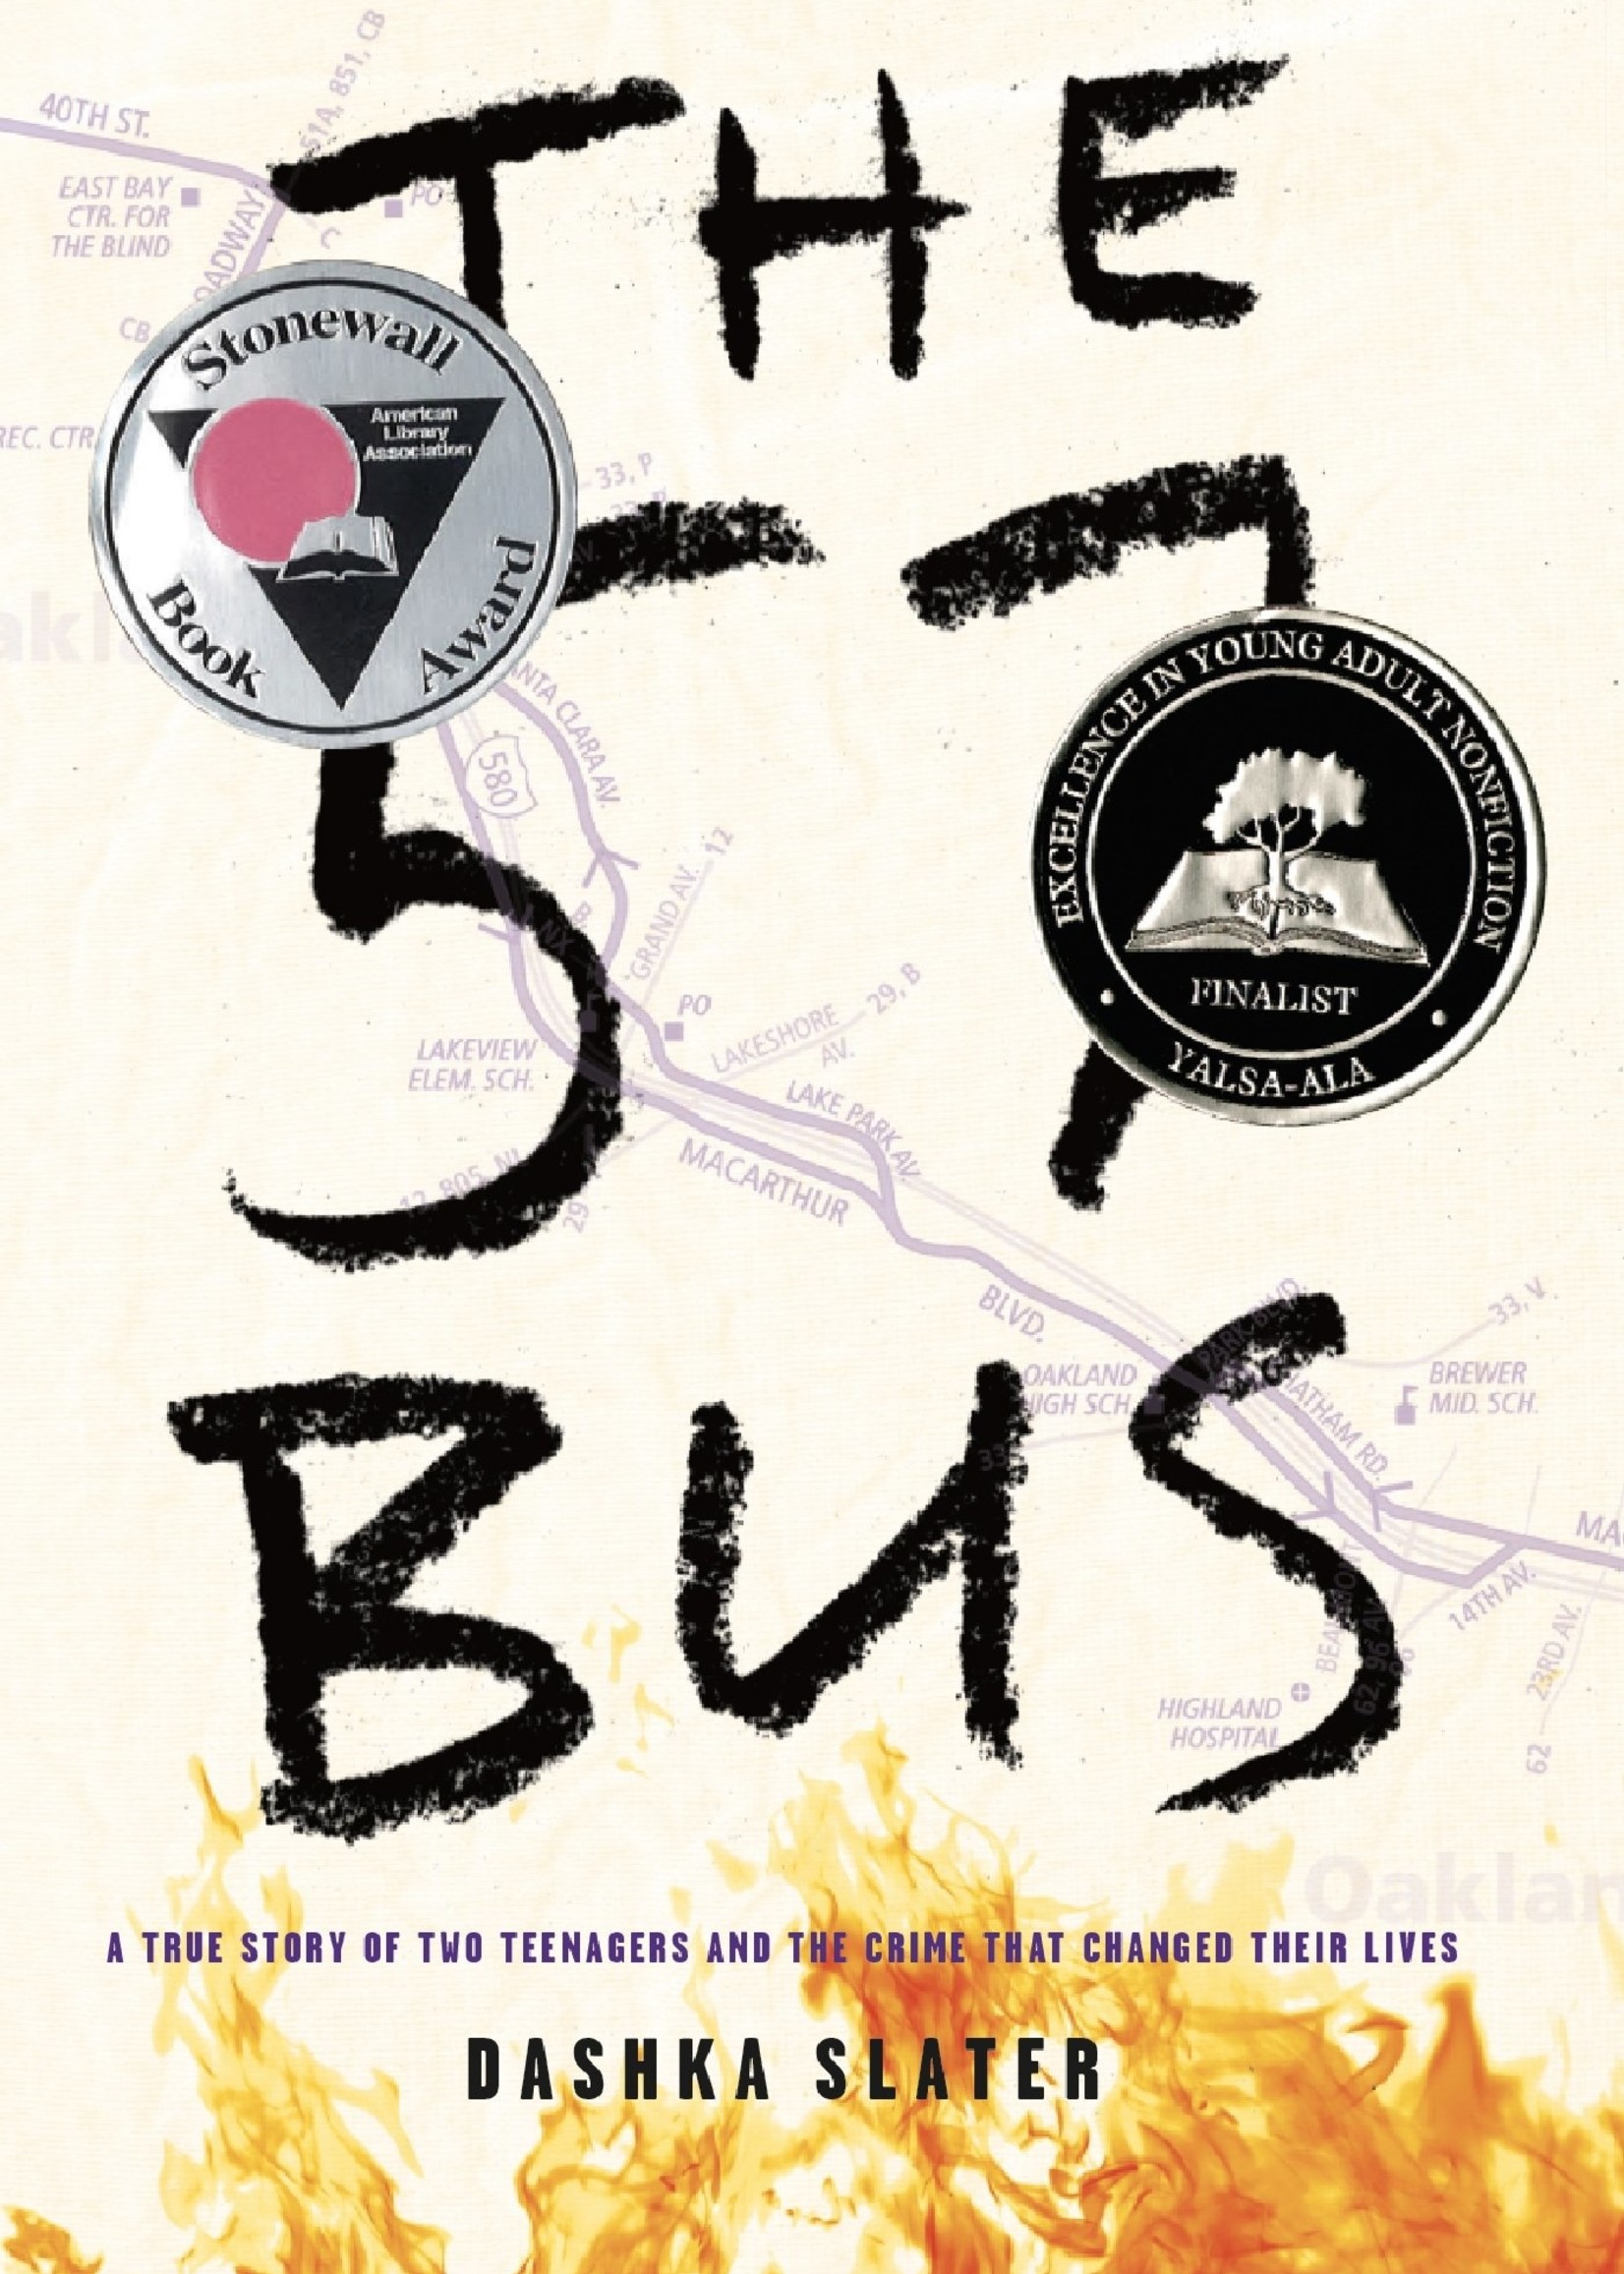 The 57 Bus, A True Story of Two Teenagers and the Crime That Changed Their Lives - Hardcover